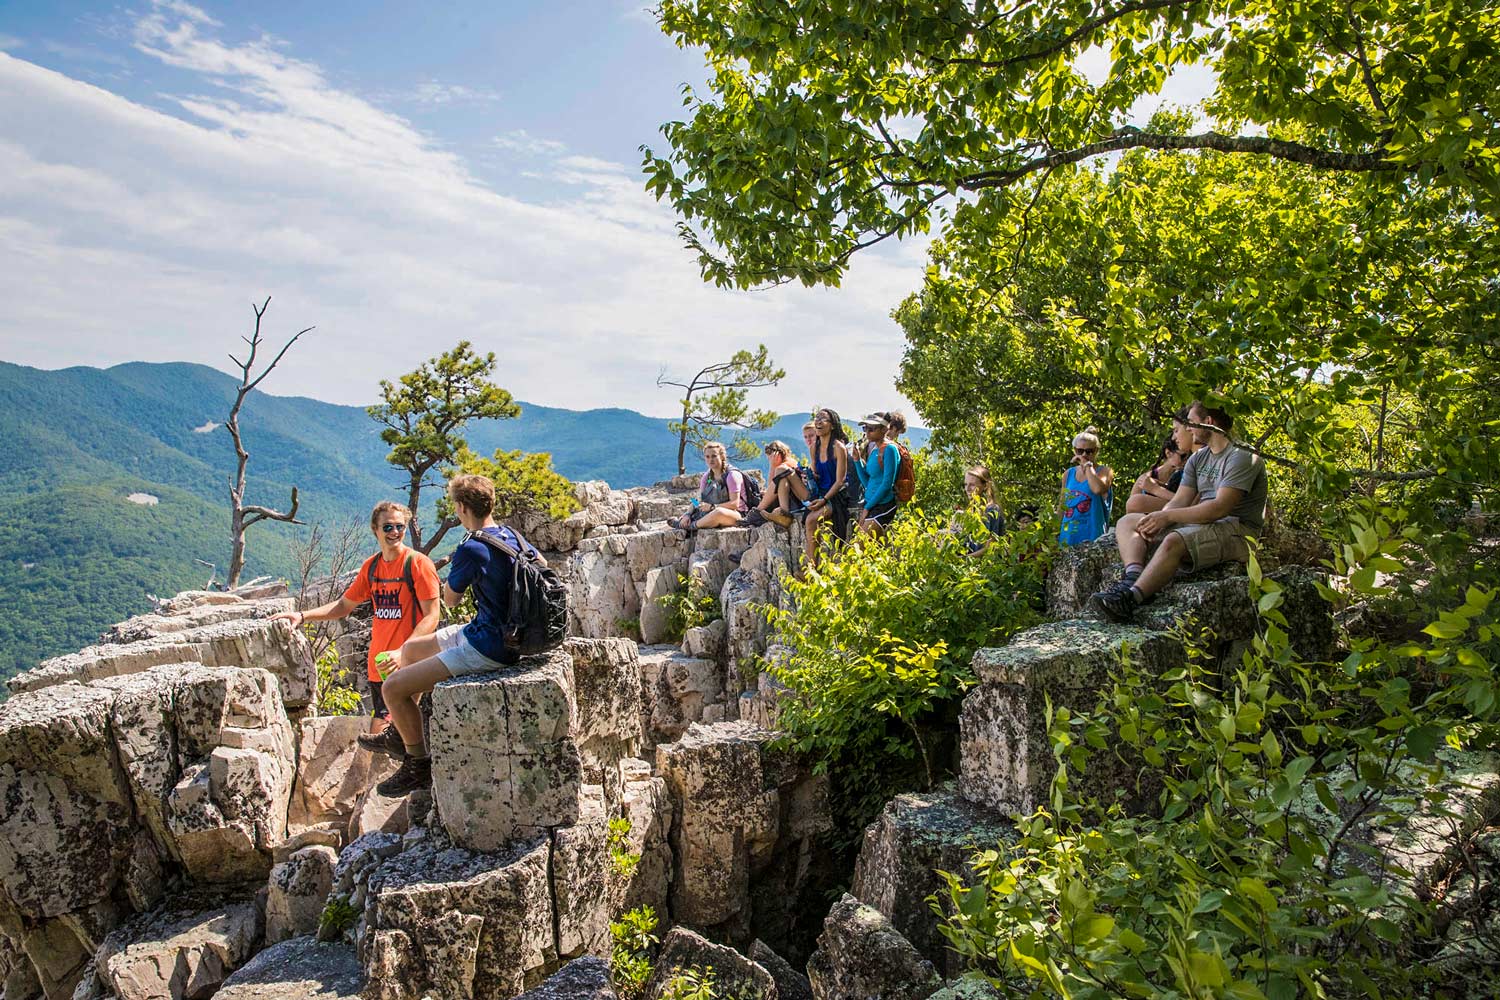 Students sit on boulders talking to each other at the top of a mountain peak